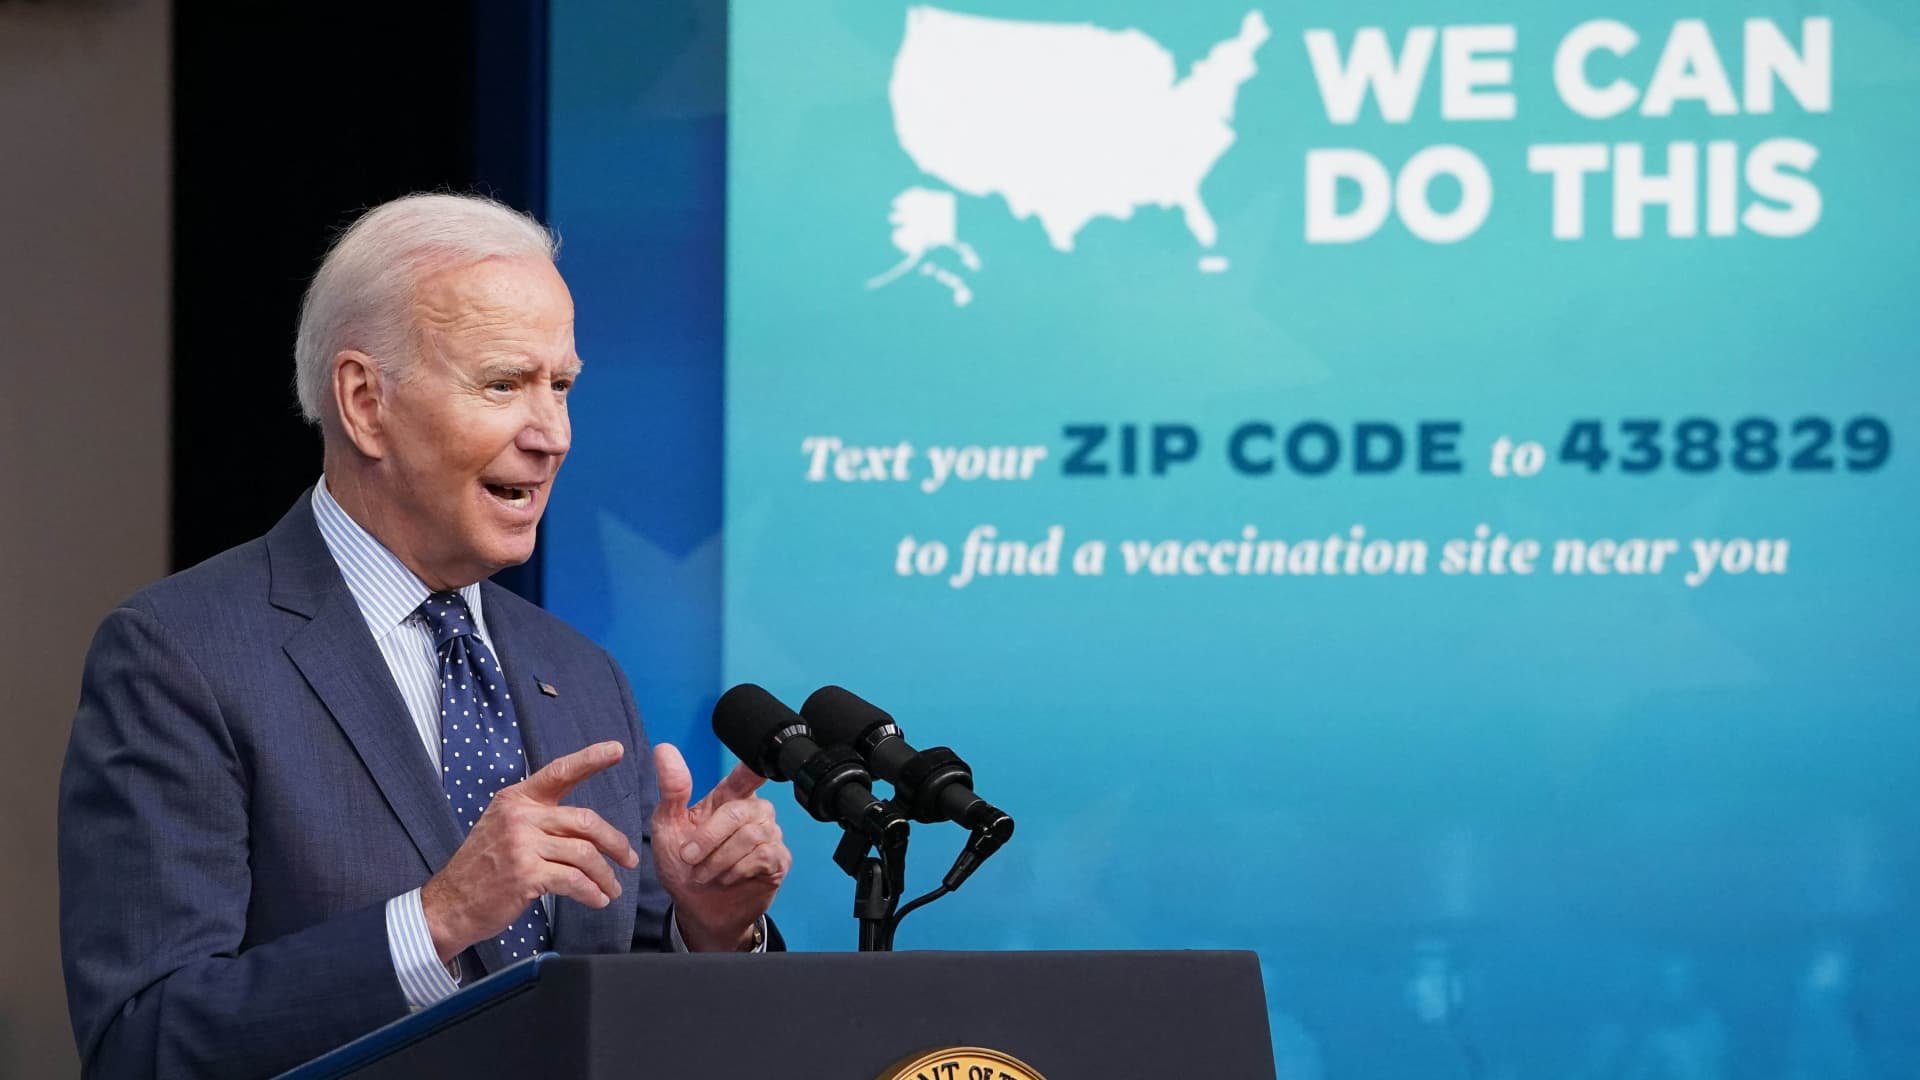 Biden doubles down on U.S. efforts to get more Americans vaccinated by the Fourth of July